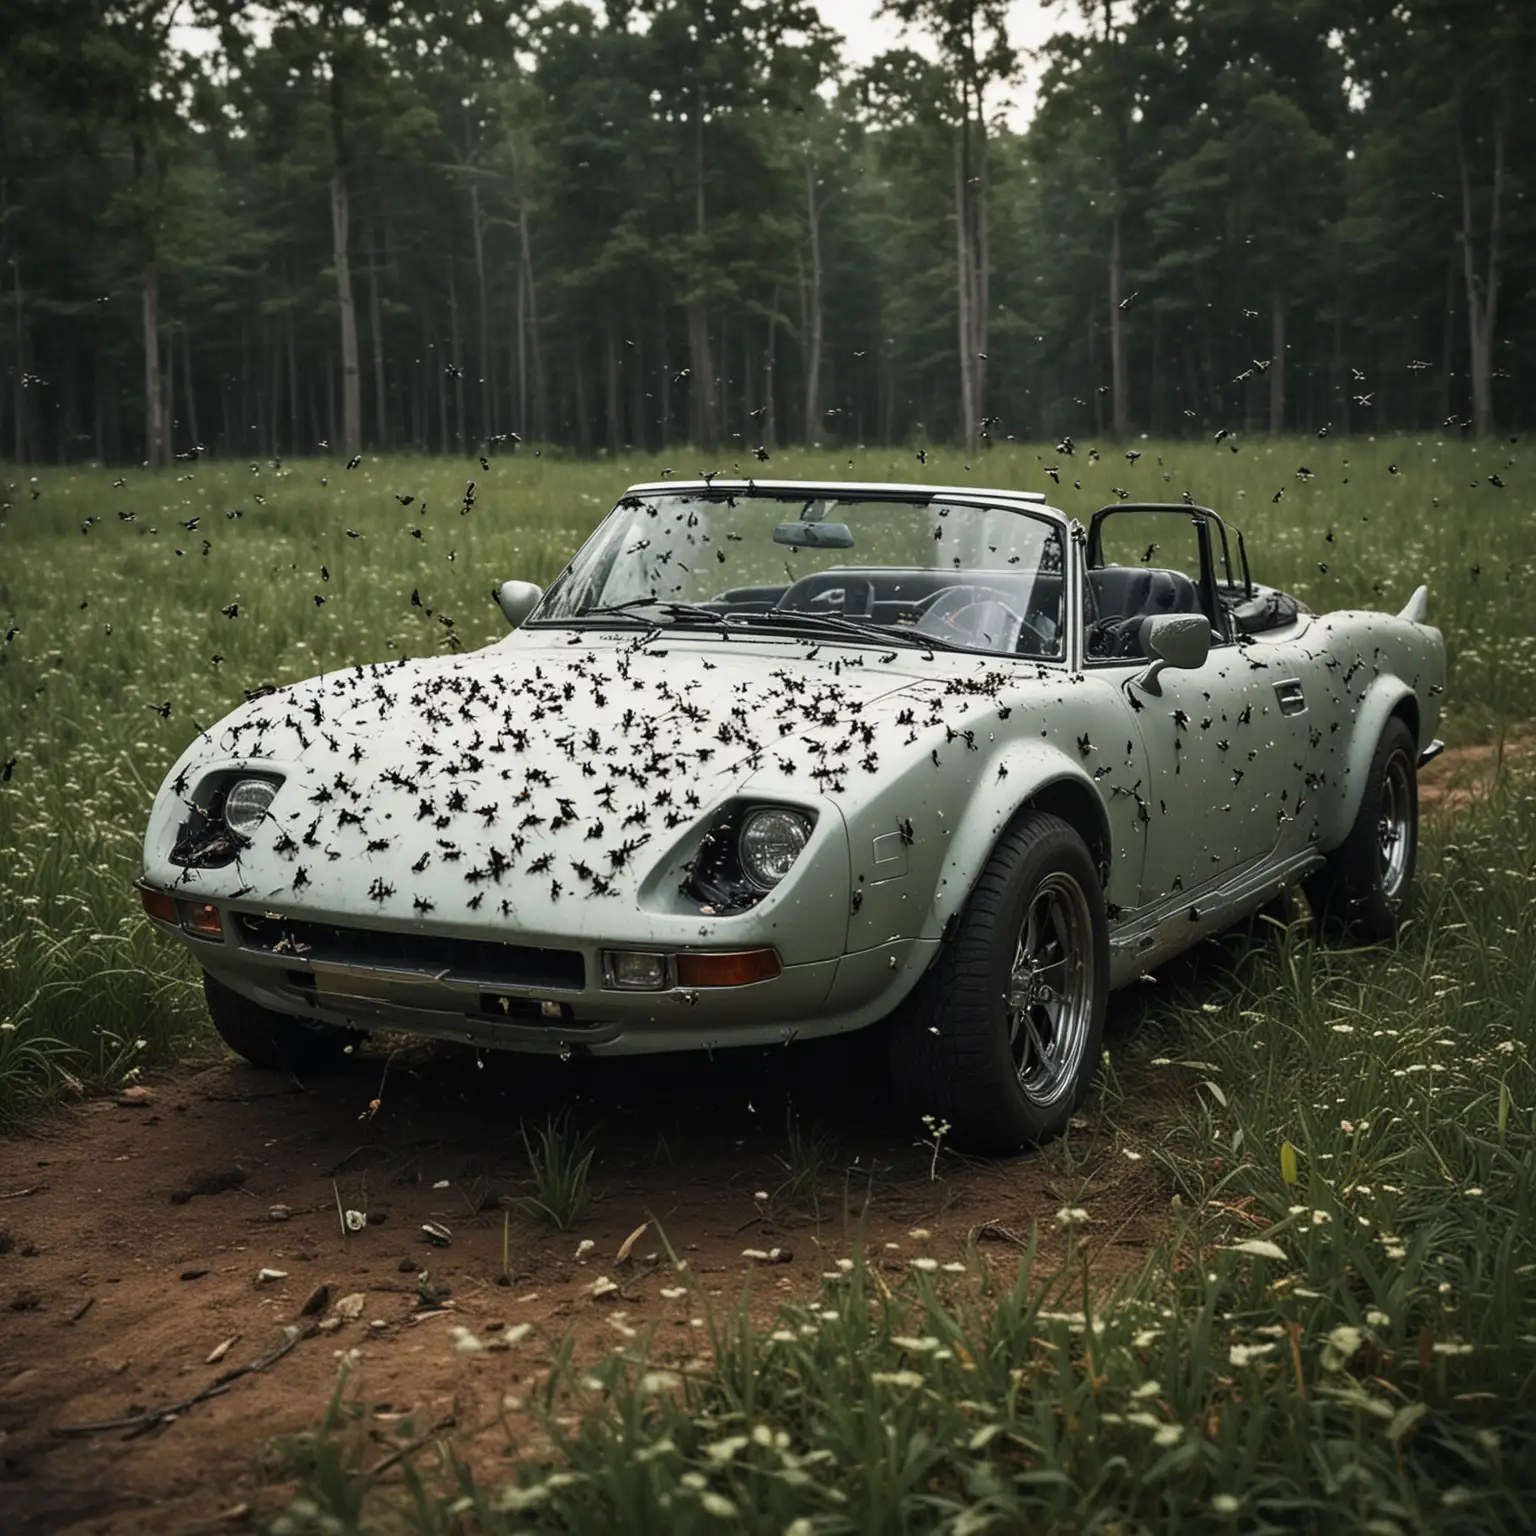 Make this same image but with a nice sports car fully covered in mosquitos make it A LOT of mosquitos